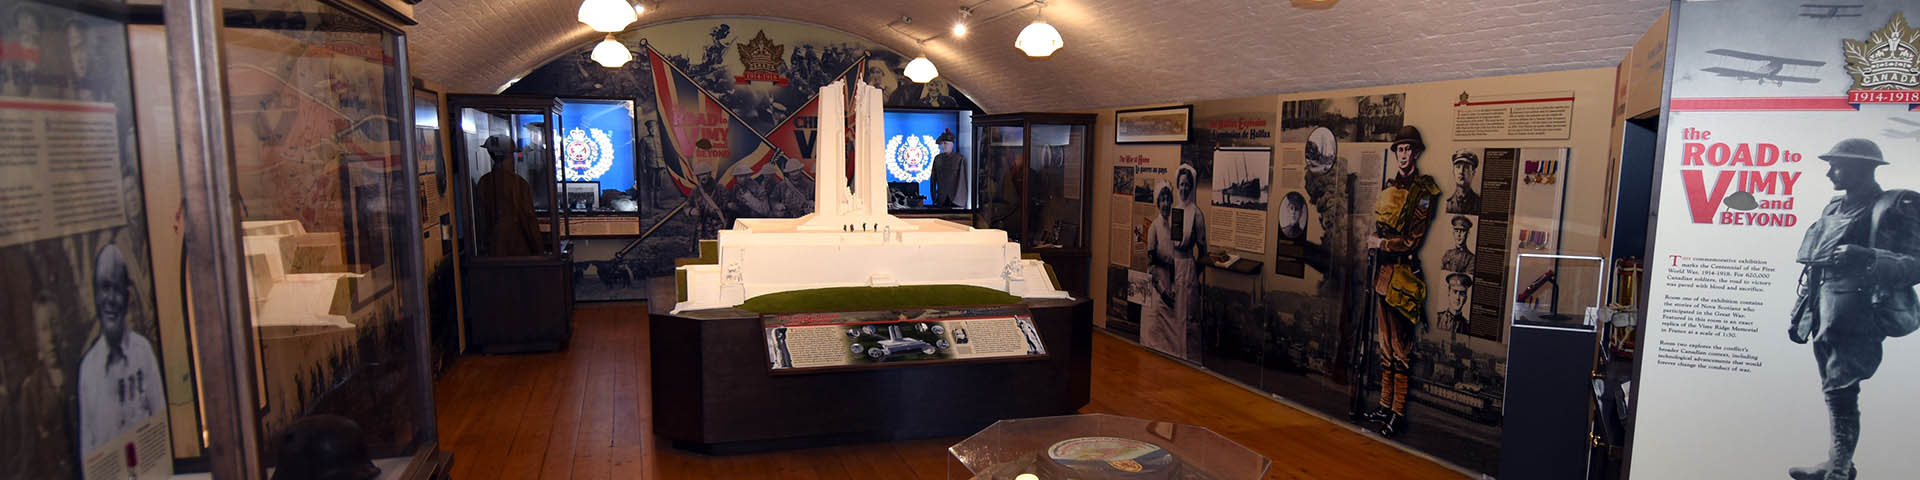 A replica model of the Vimy Memorial called “The Road to Vimy and Beyond” on display inside the Army Museum at Halifax Citadel National Historic Site. 